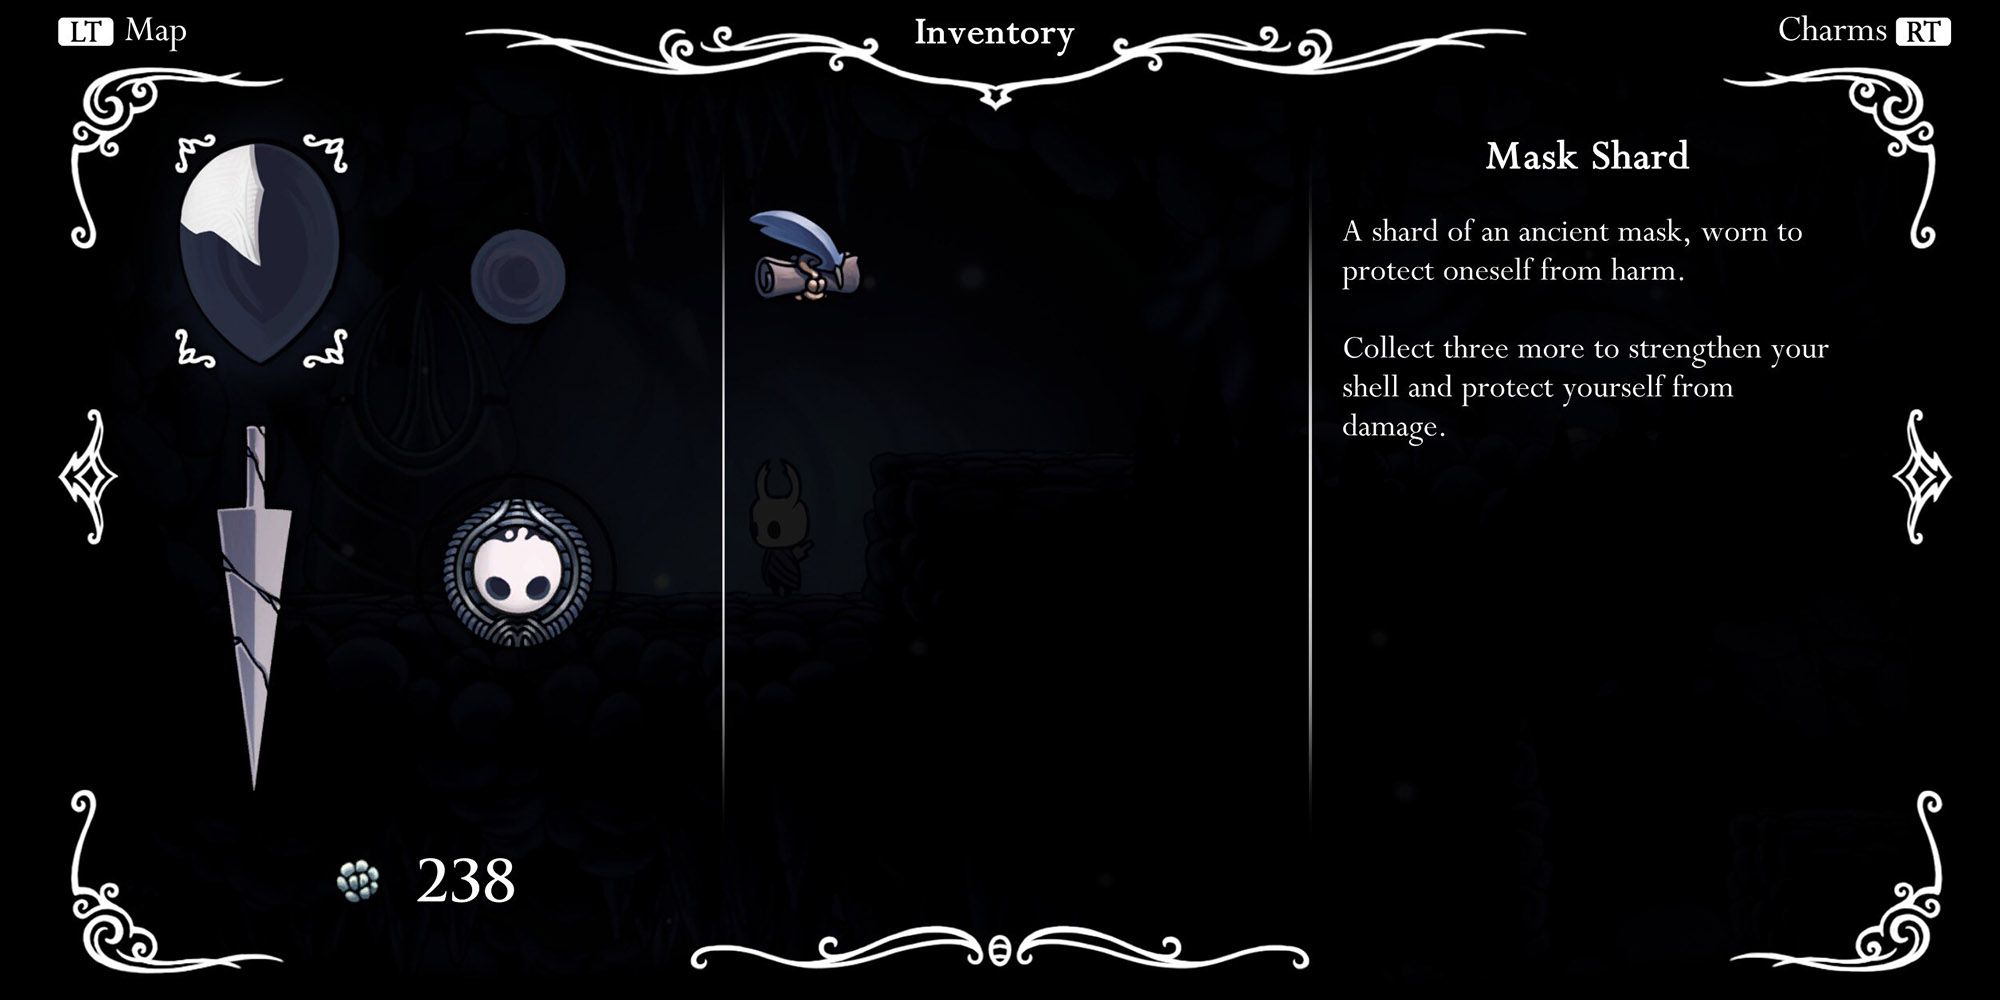 Hollow Knight - Mask Shard Description In-Game